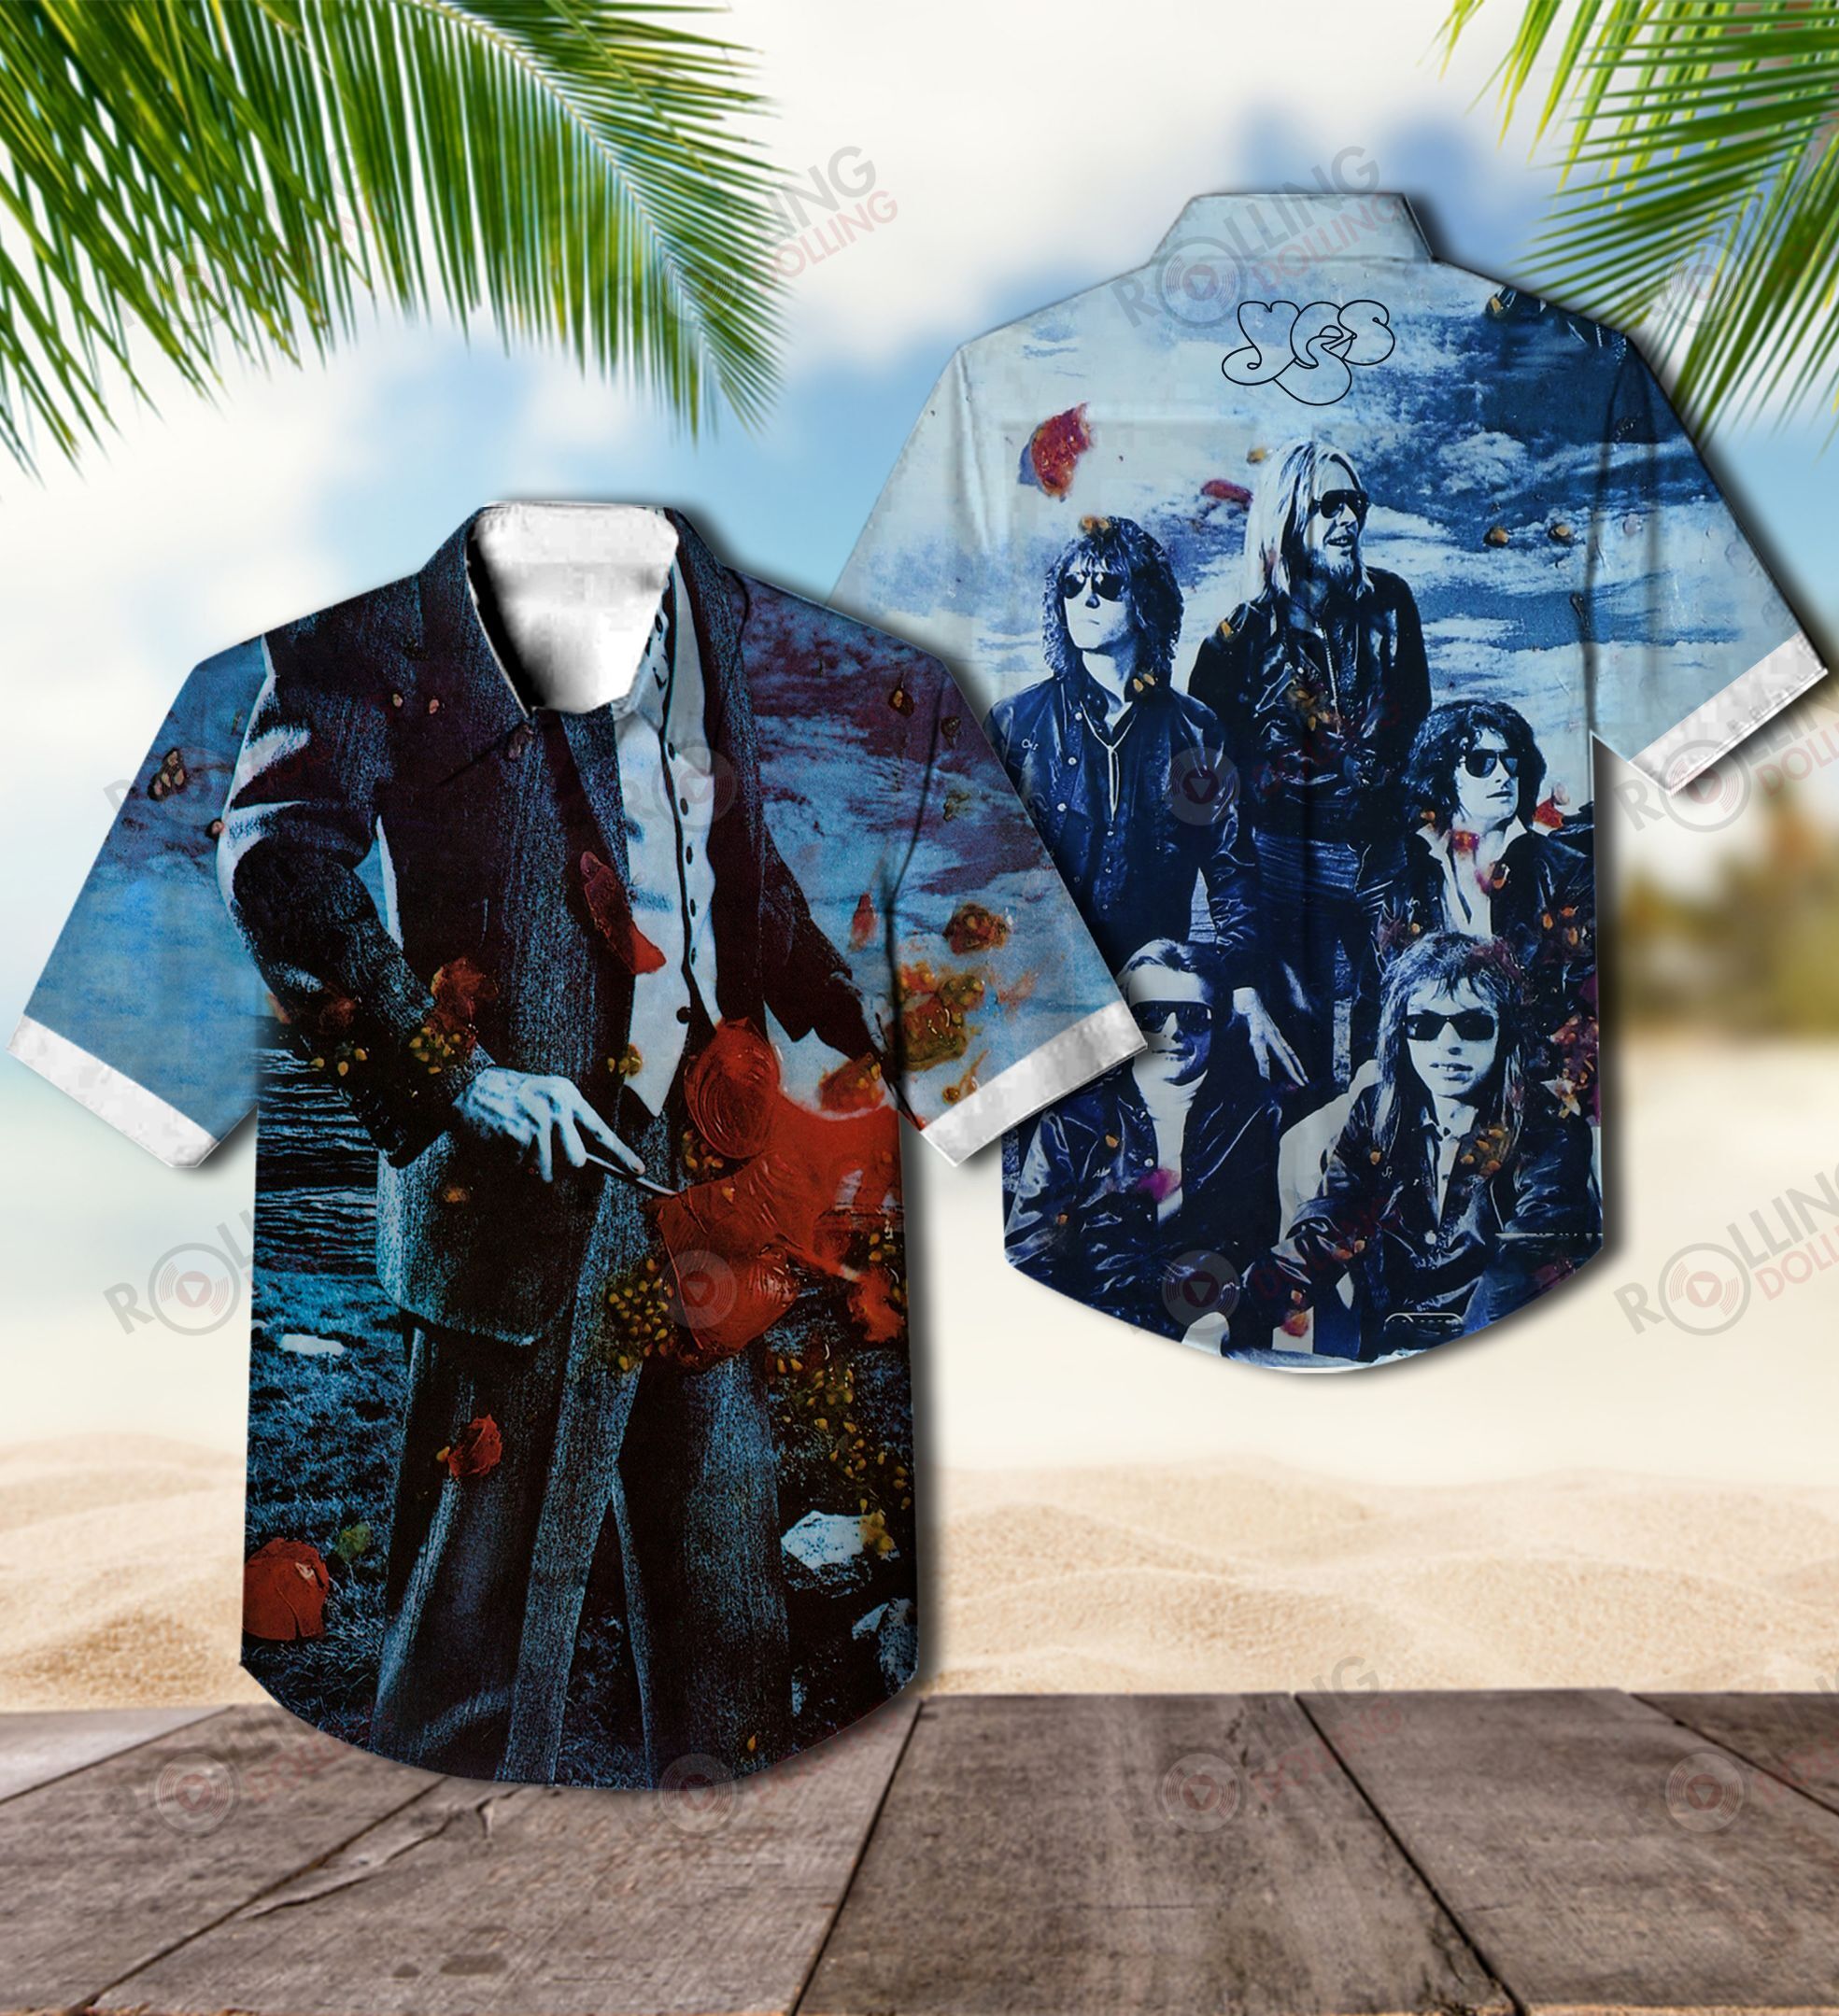 This would make a great gift for any fan who loves Hawaiian Shirt as well as Rock band 177